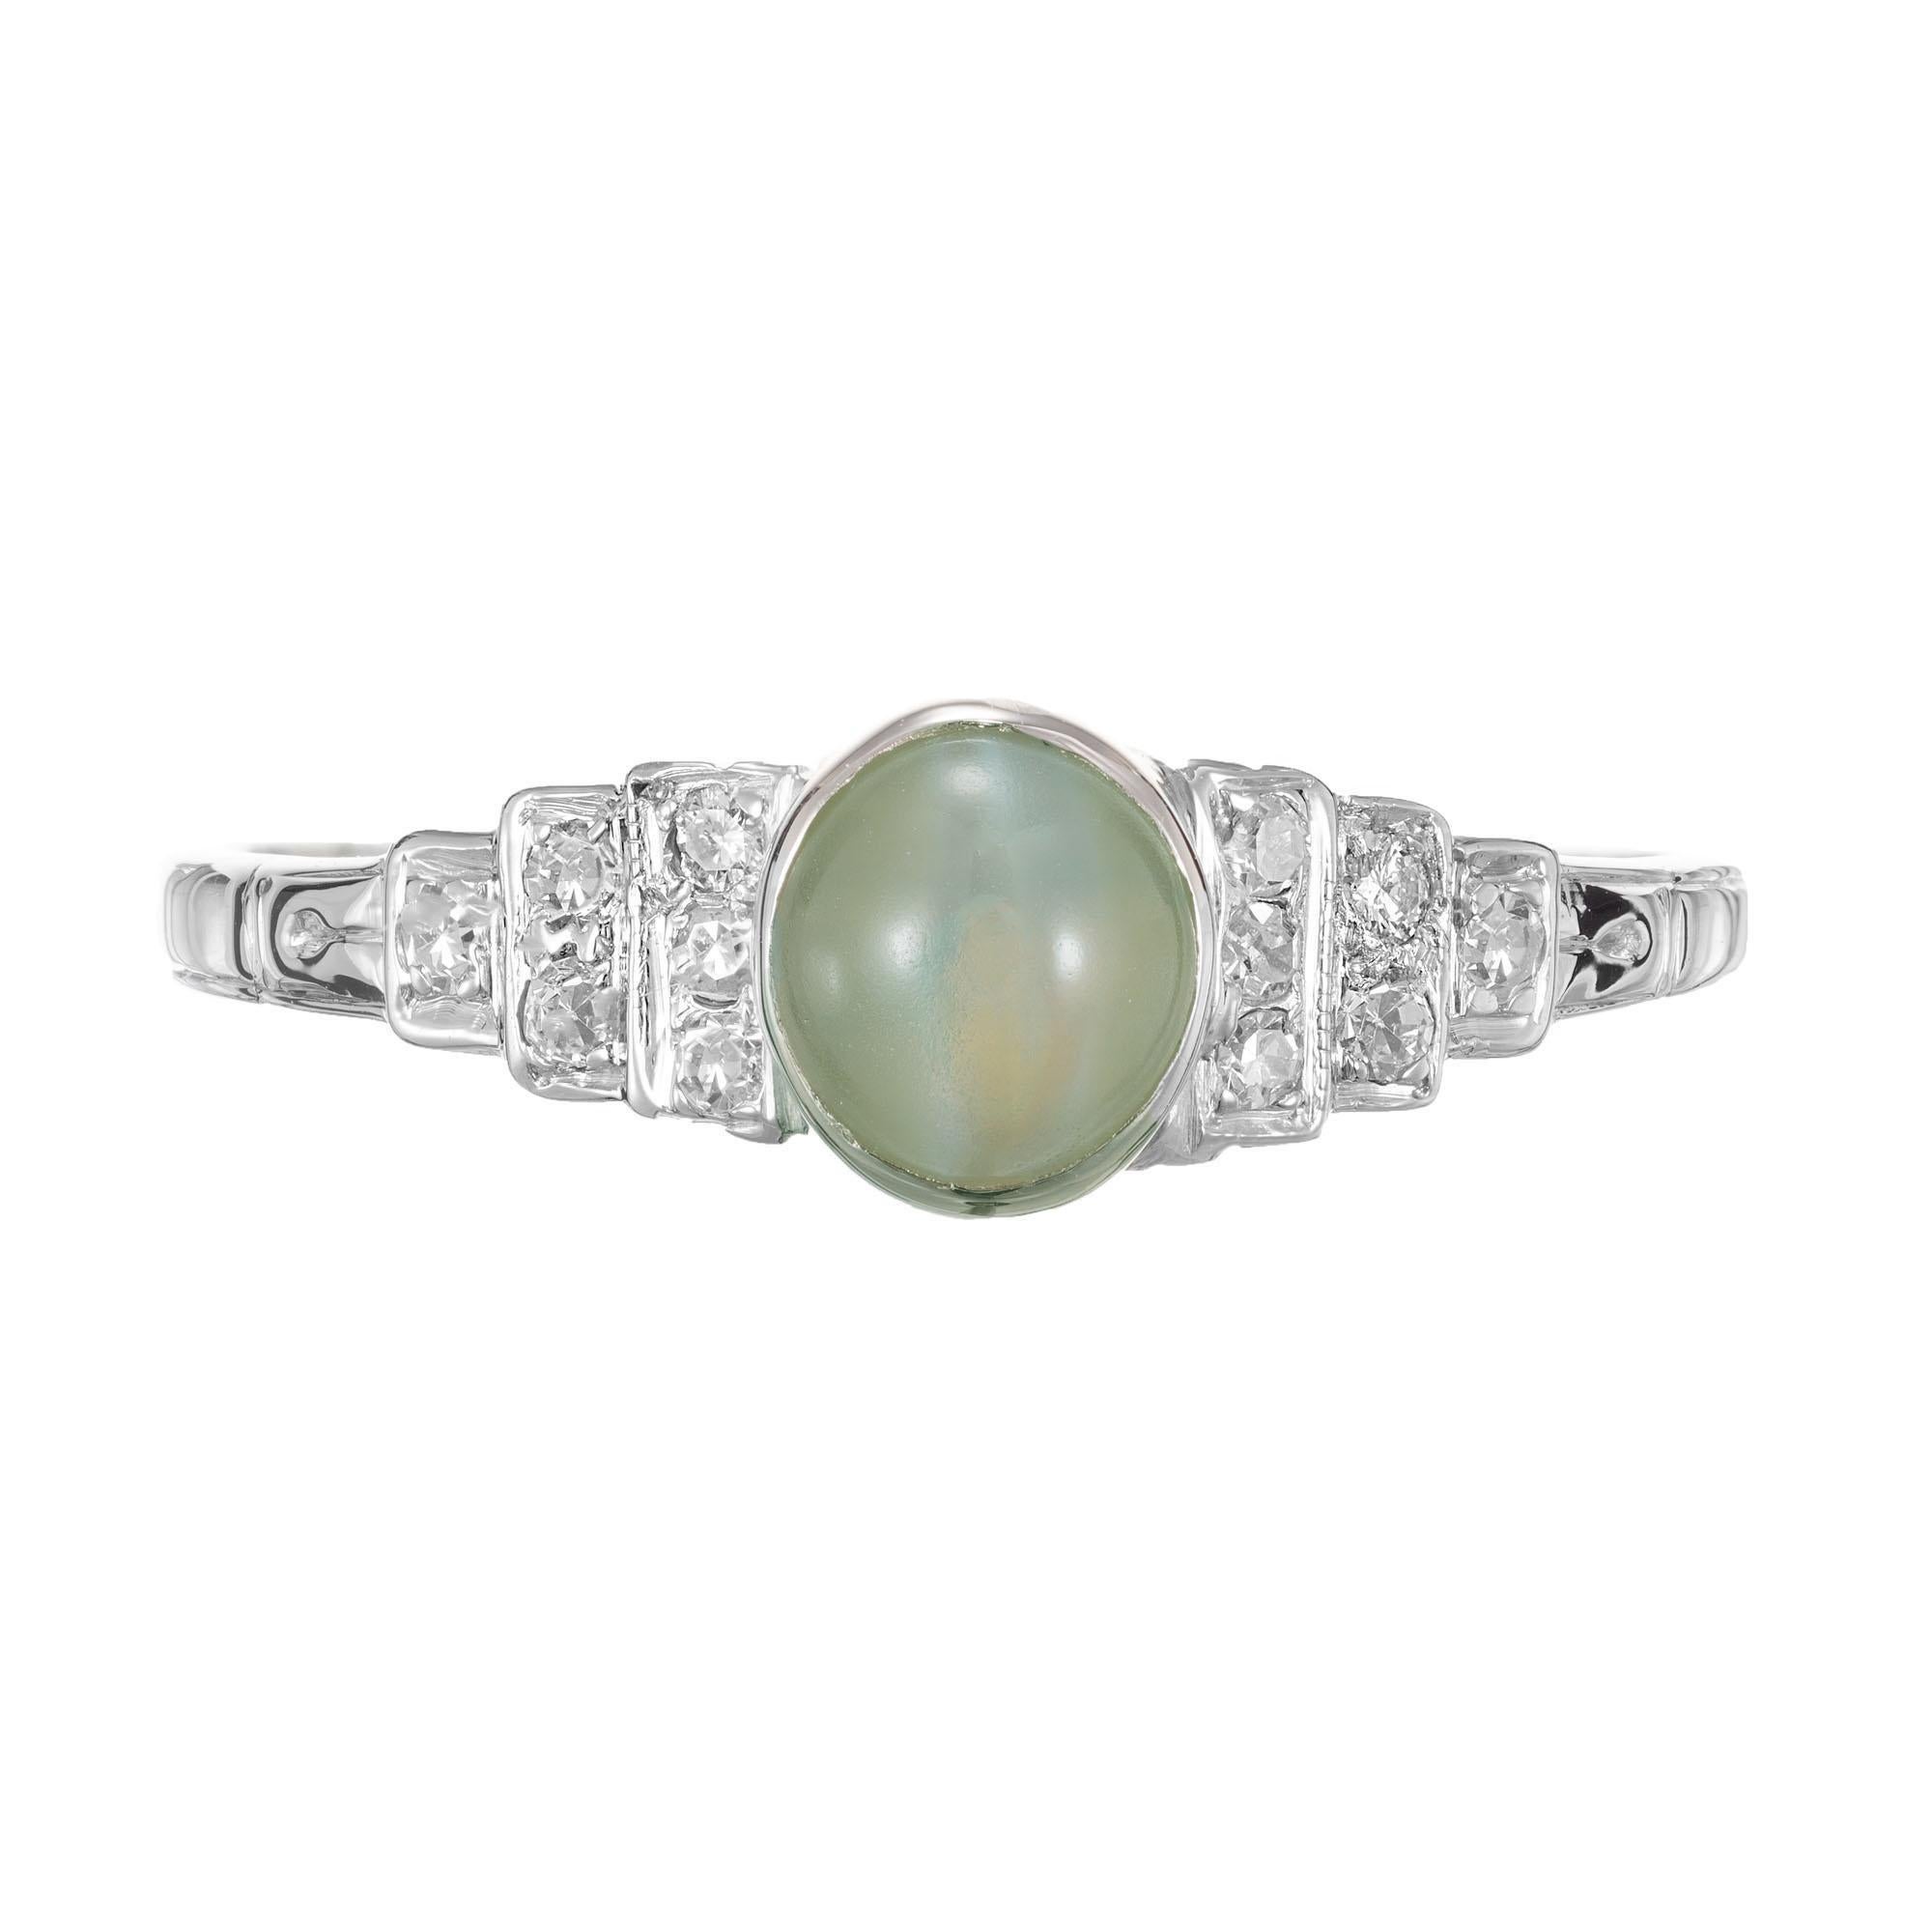 Chrysoberyl cat’s eye and diamond Art Deco engagement ring. Chrysoberyl cabochon oval center stone with 12 round accent diamonds in a Platinum setting. Circa 1929.

12 round diamonds approx. total weight .12cts
1 oval cabochon cut Chrysoberyl cat’s